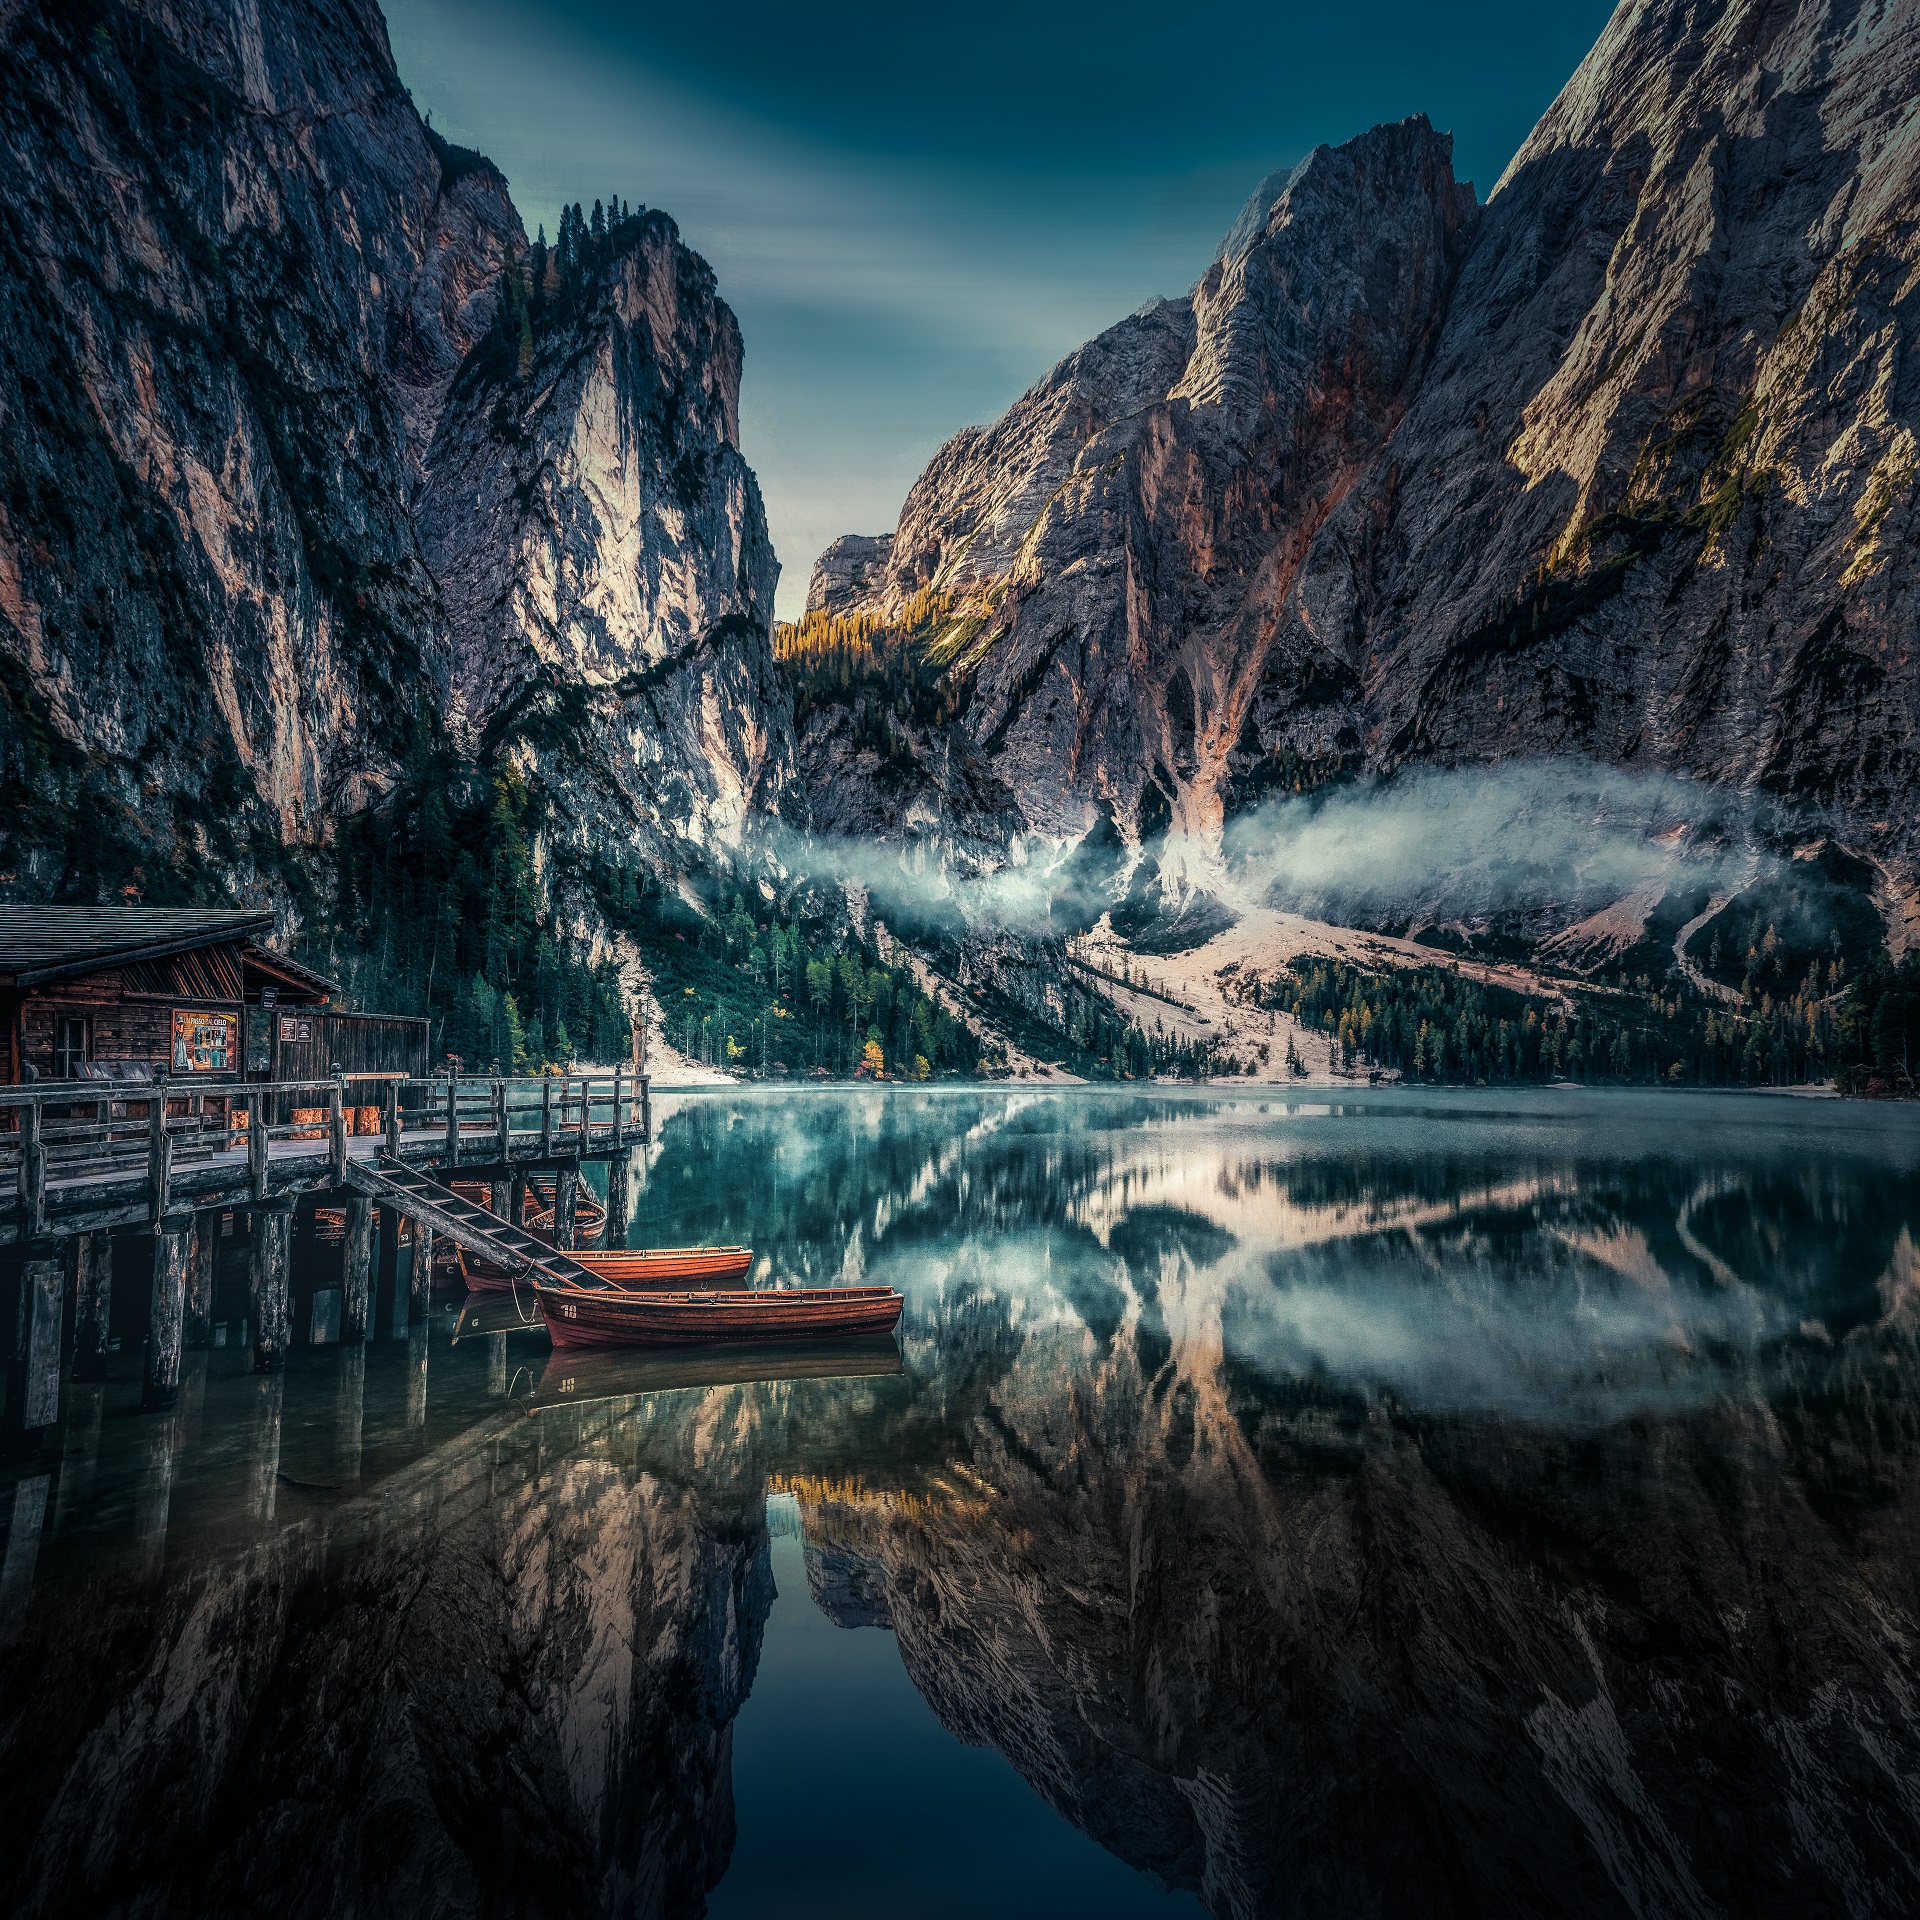 General 1920x1920 nature lake mountains boat reflection snow trees forest Pragser Wildsee